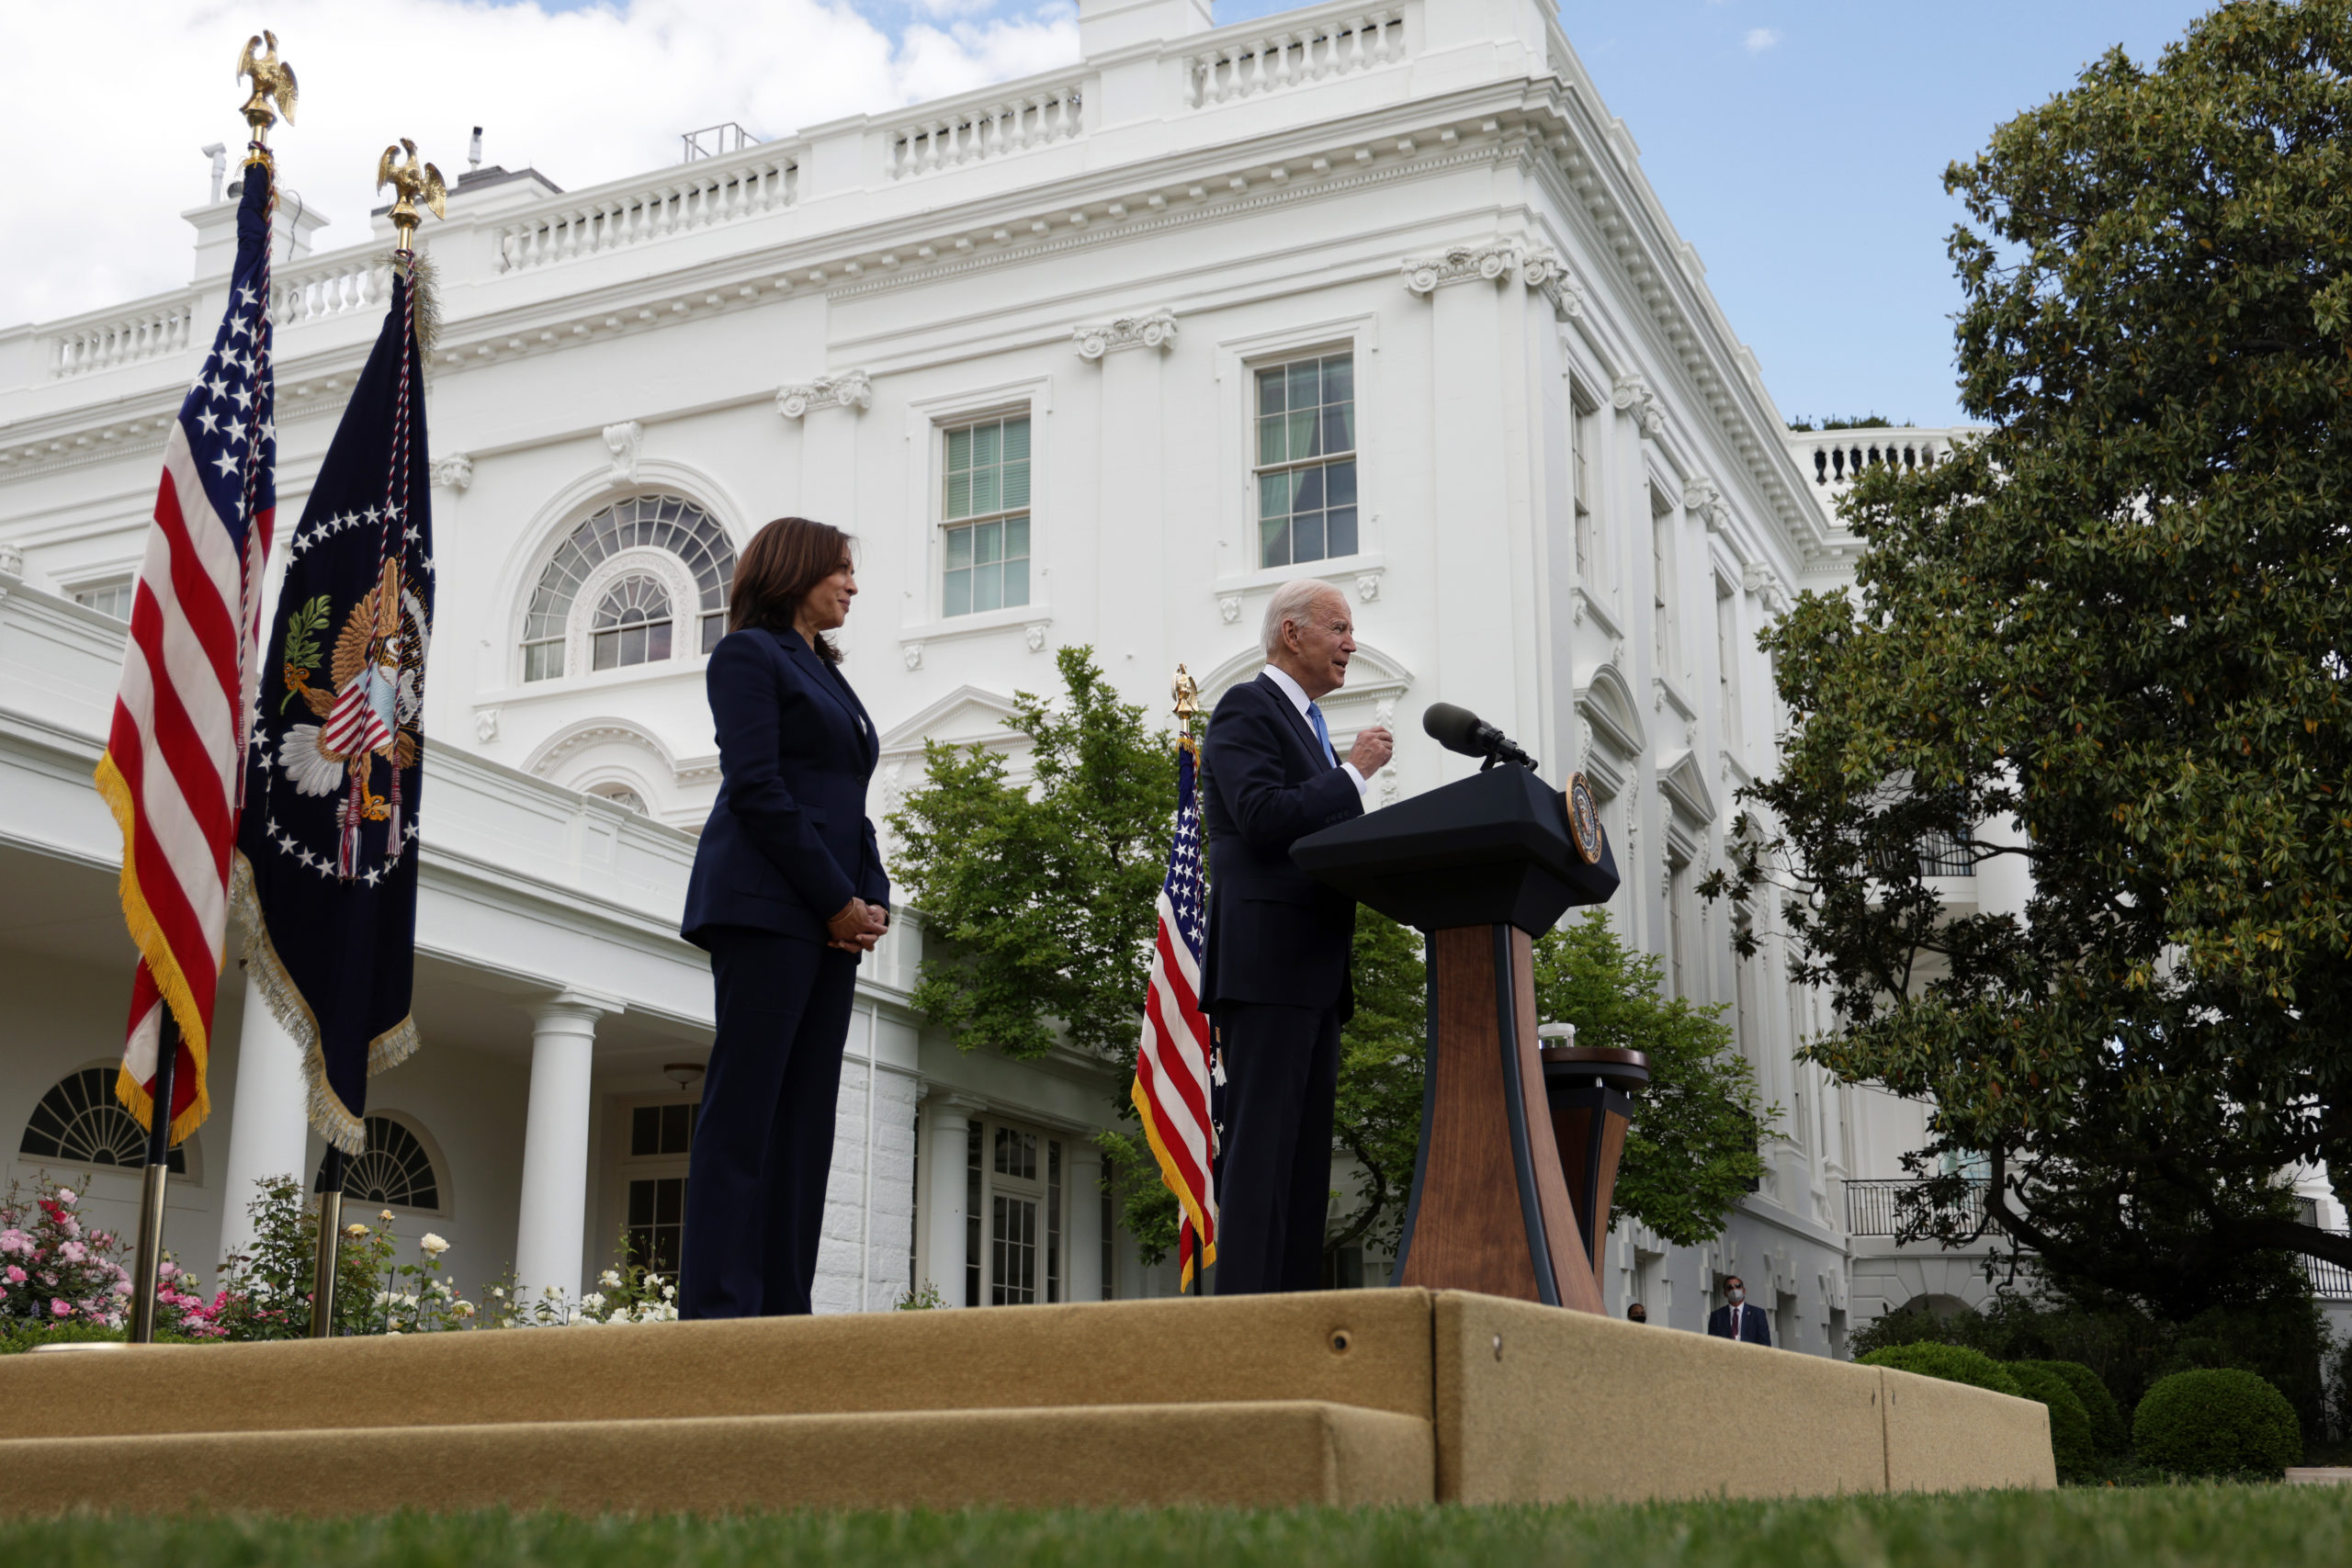 WASHINGTON, DC - MAY 13: U.S. President Joe Biden delivers remarks on the COVID-19 response and vaccination program as Vice President Kamala Harris listens in the Rose Garden of the White House on May 13, 2021 in Washington, DC. The Centers for Disease Control and Prevention (CDC) announced today that fully vaccinated people will no longer need to wear masks or socially distance for indoor and outdoor activities in most settings. (Photo by Alex Wong/Getty Images)